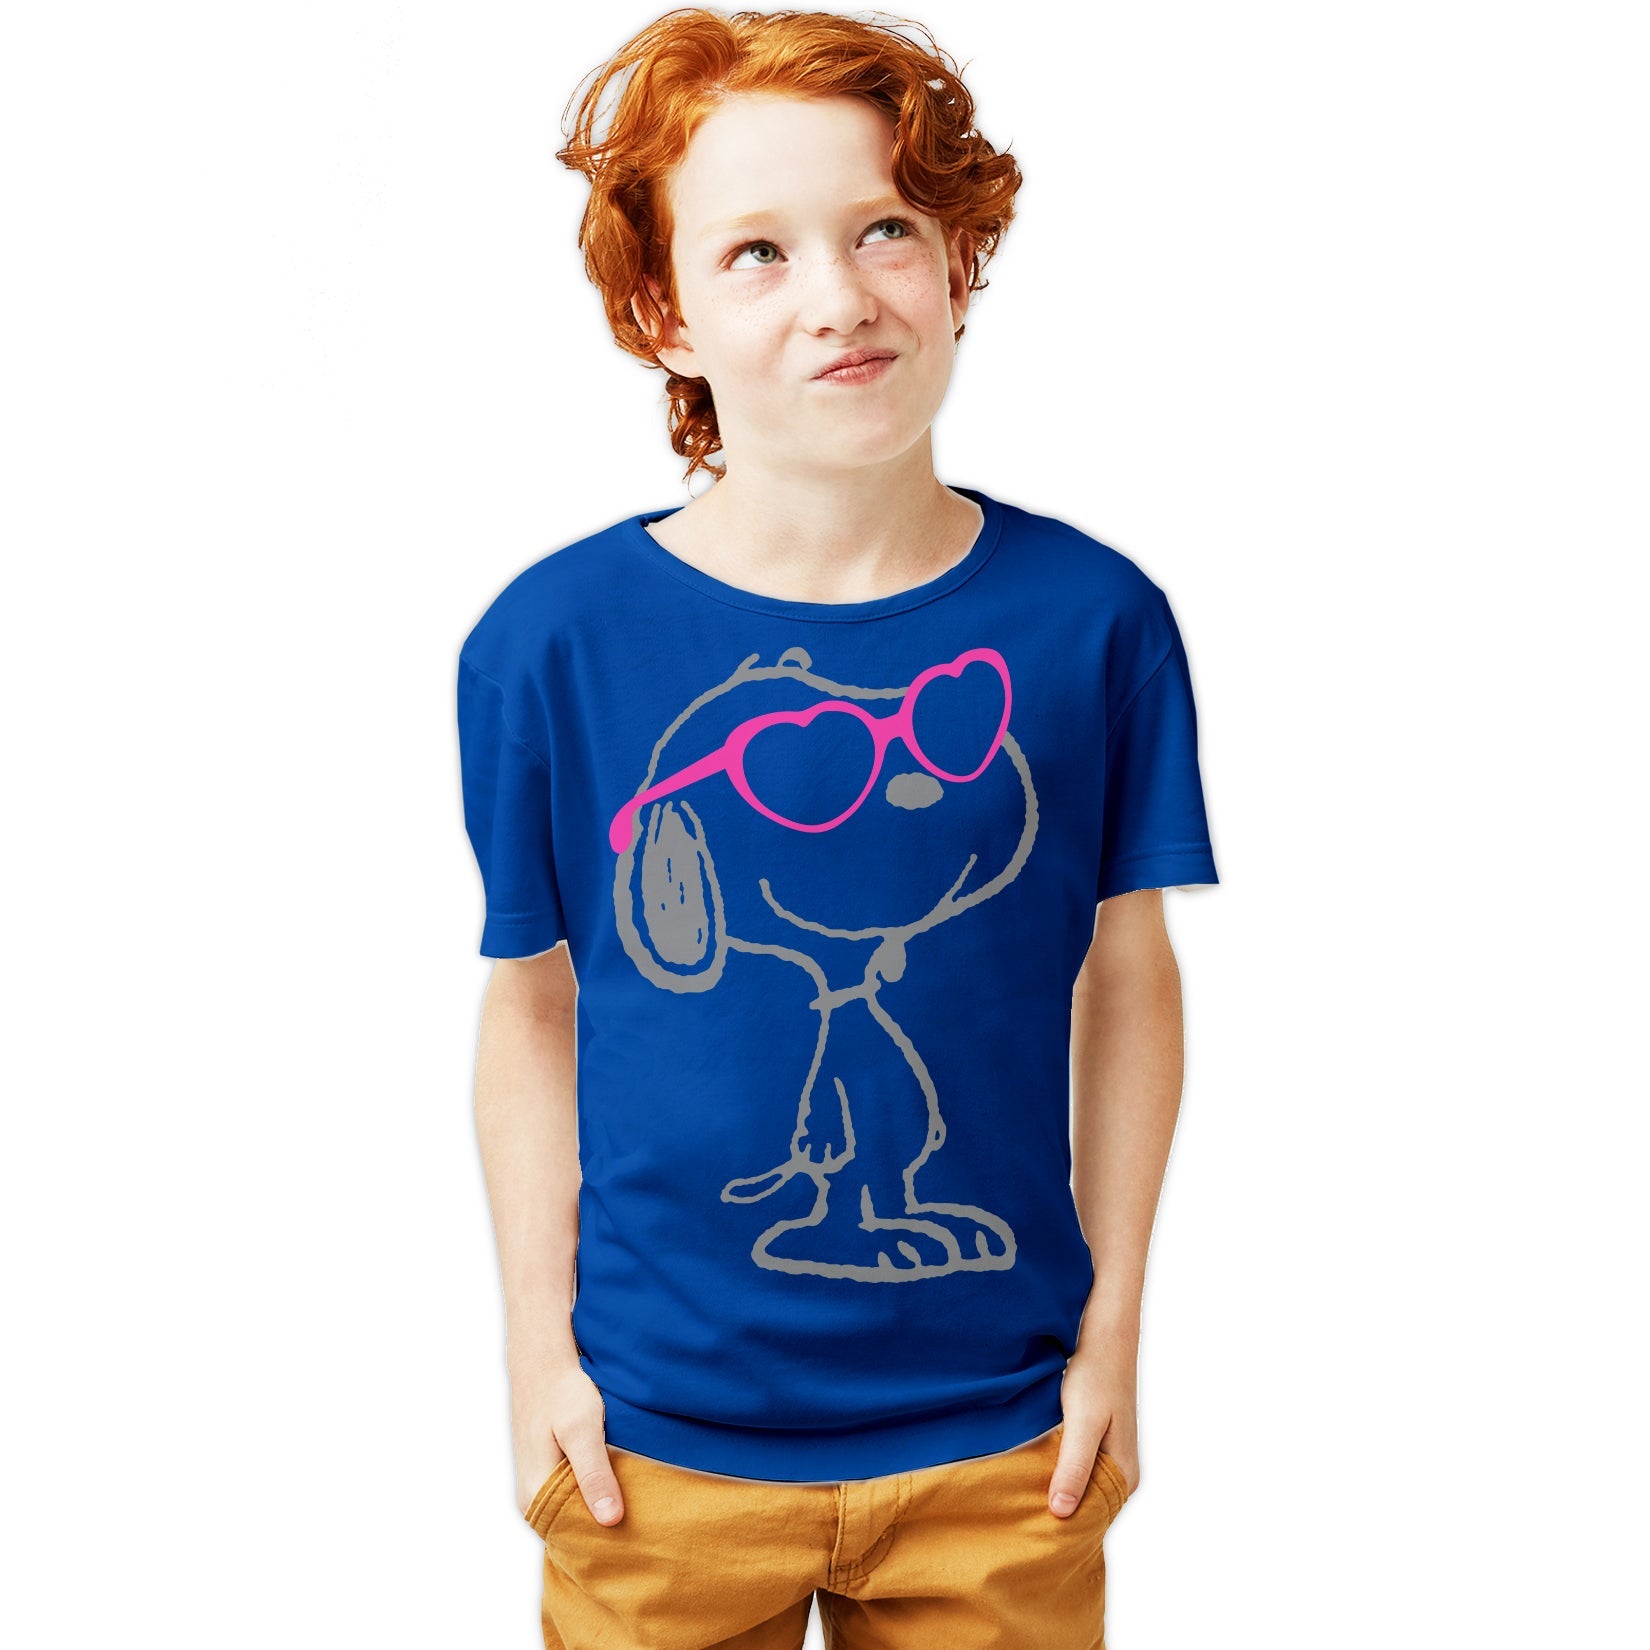 Peanuts Snoopy Heart Shades Official Youth T-Shirt